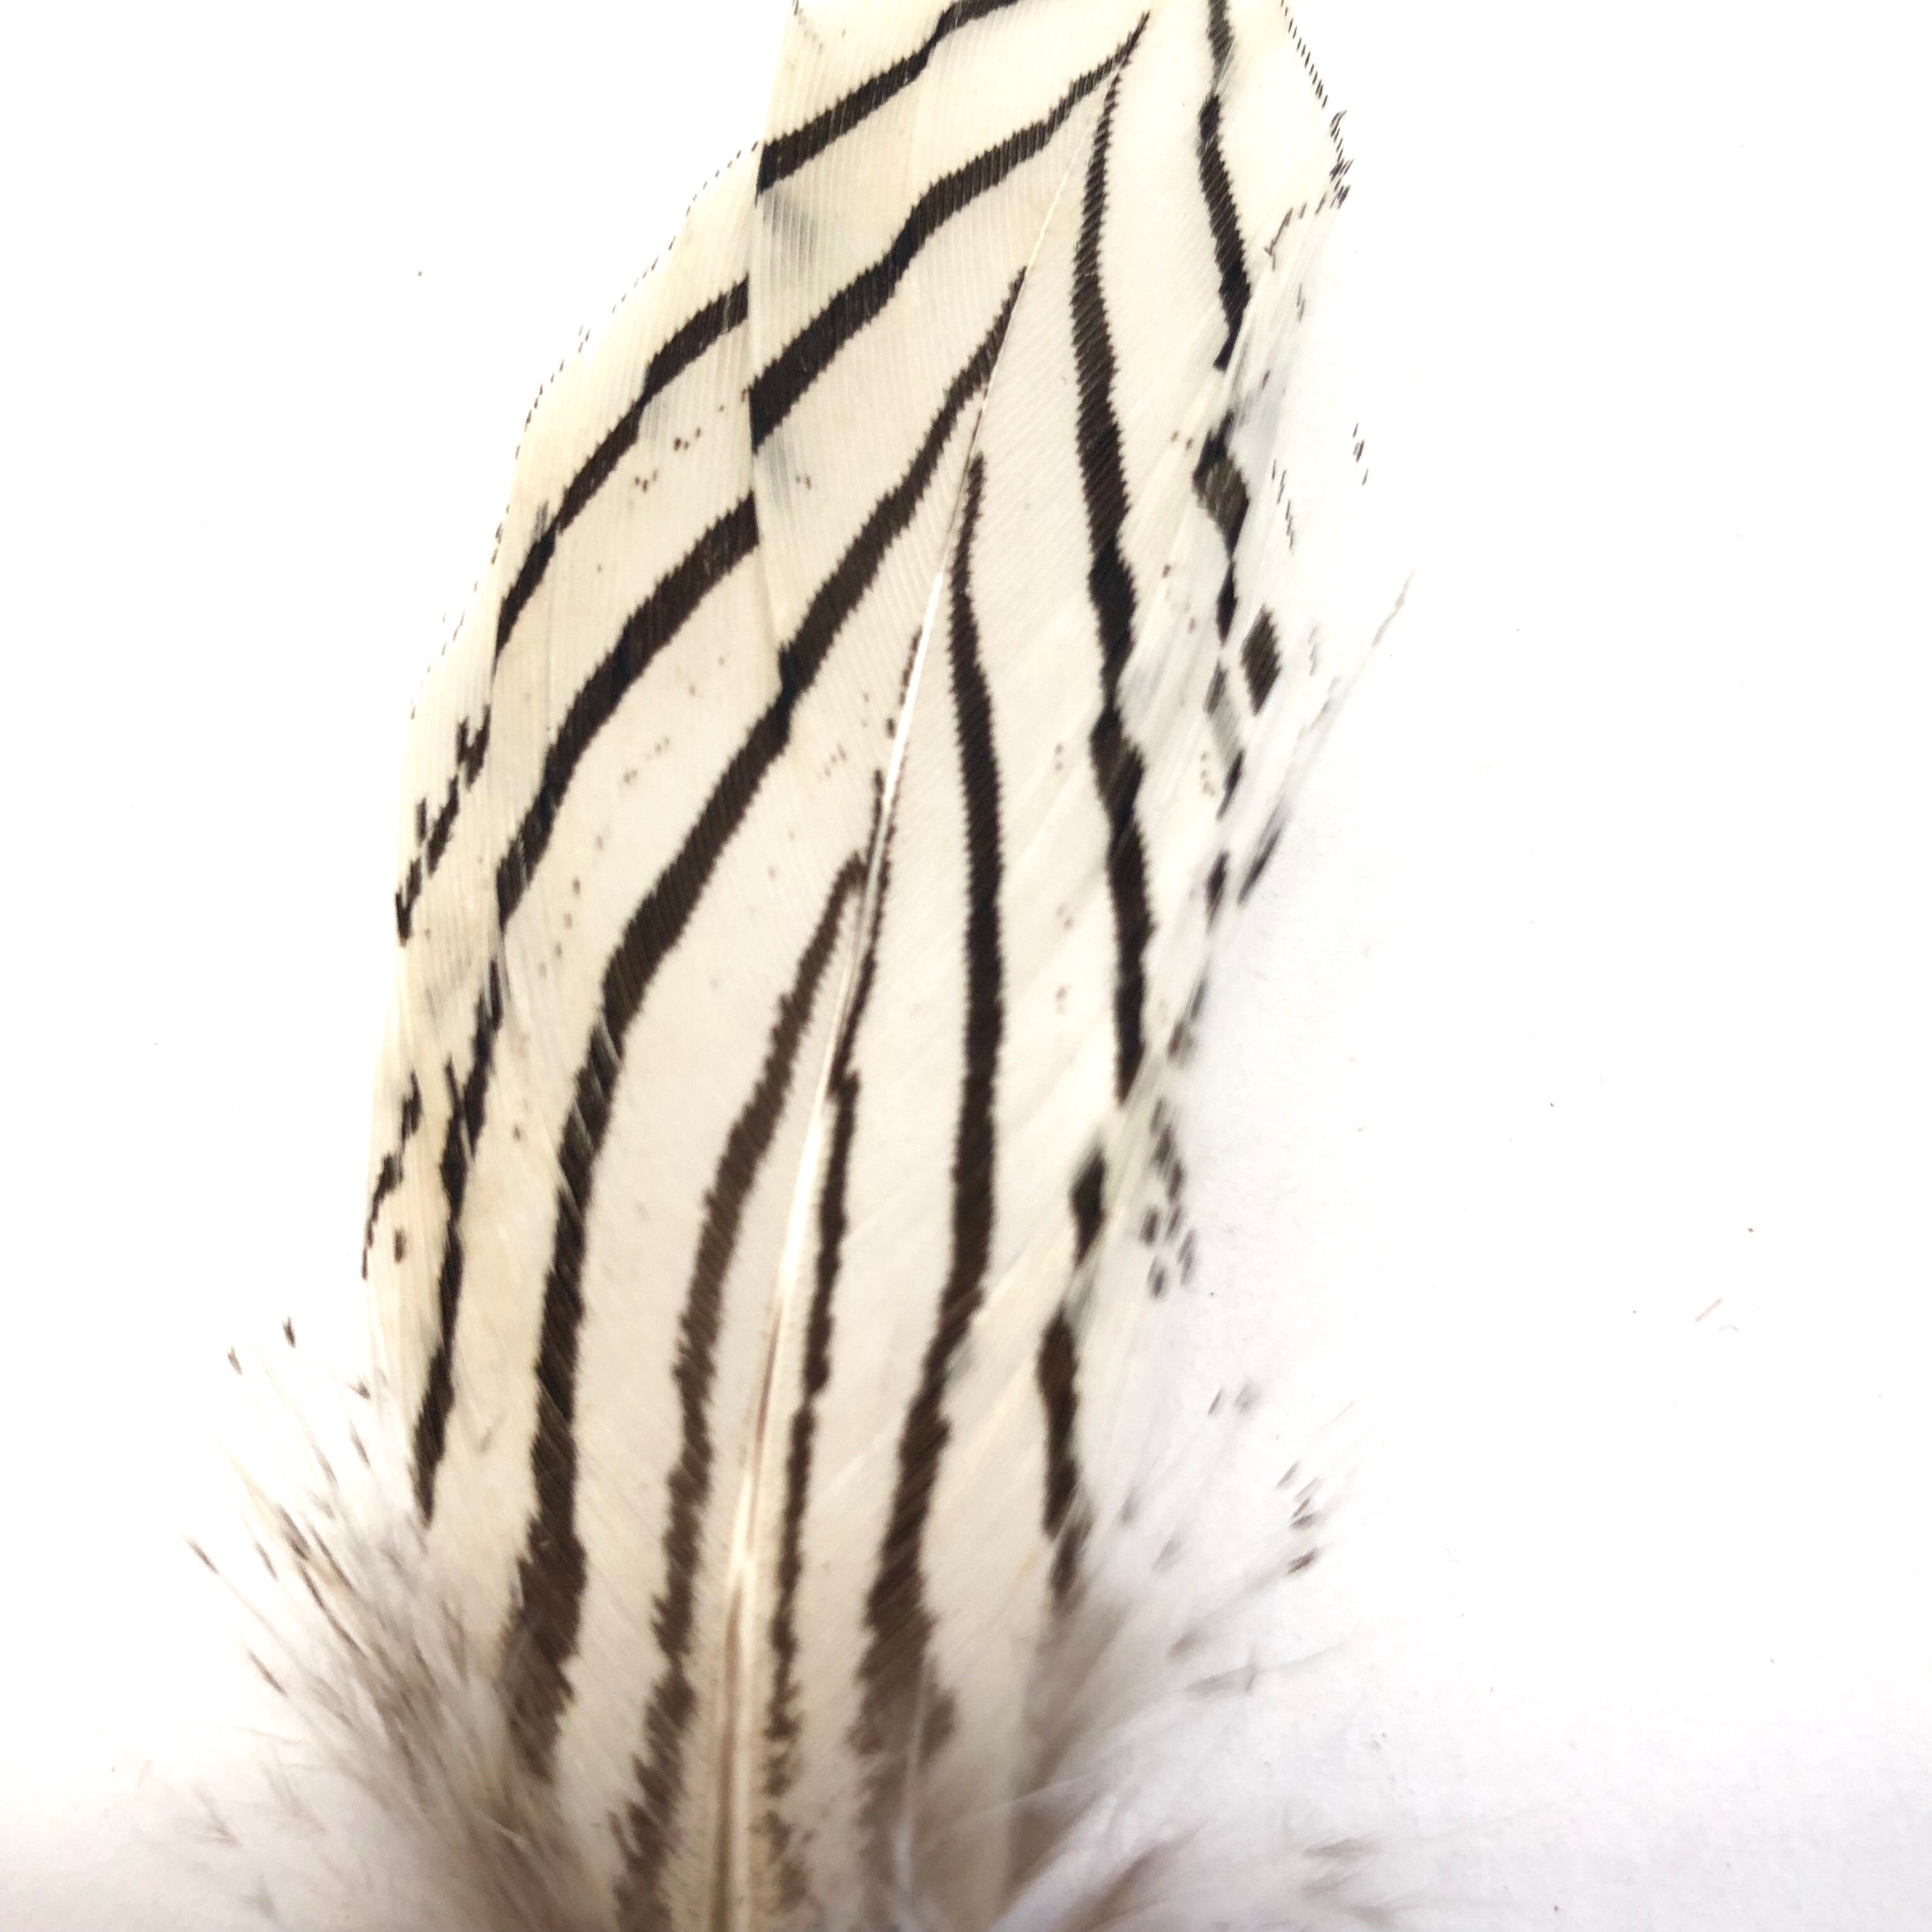 Under 6" Silver Pheasant Tail Feather x 10 pcs - Natural